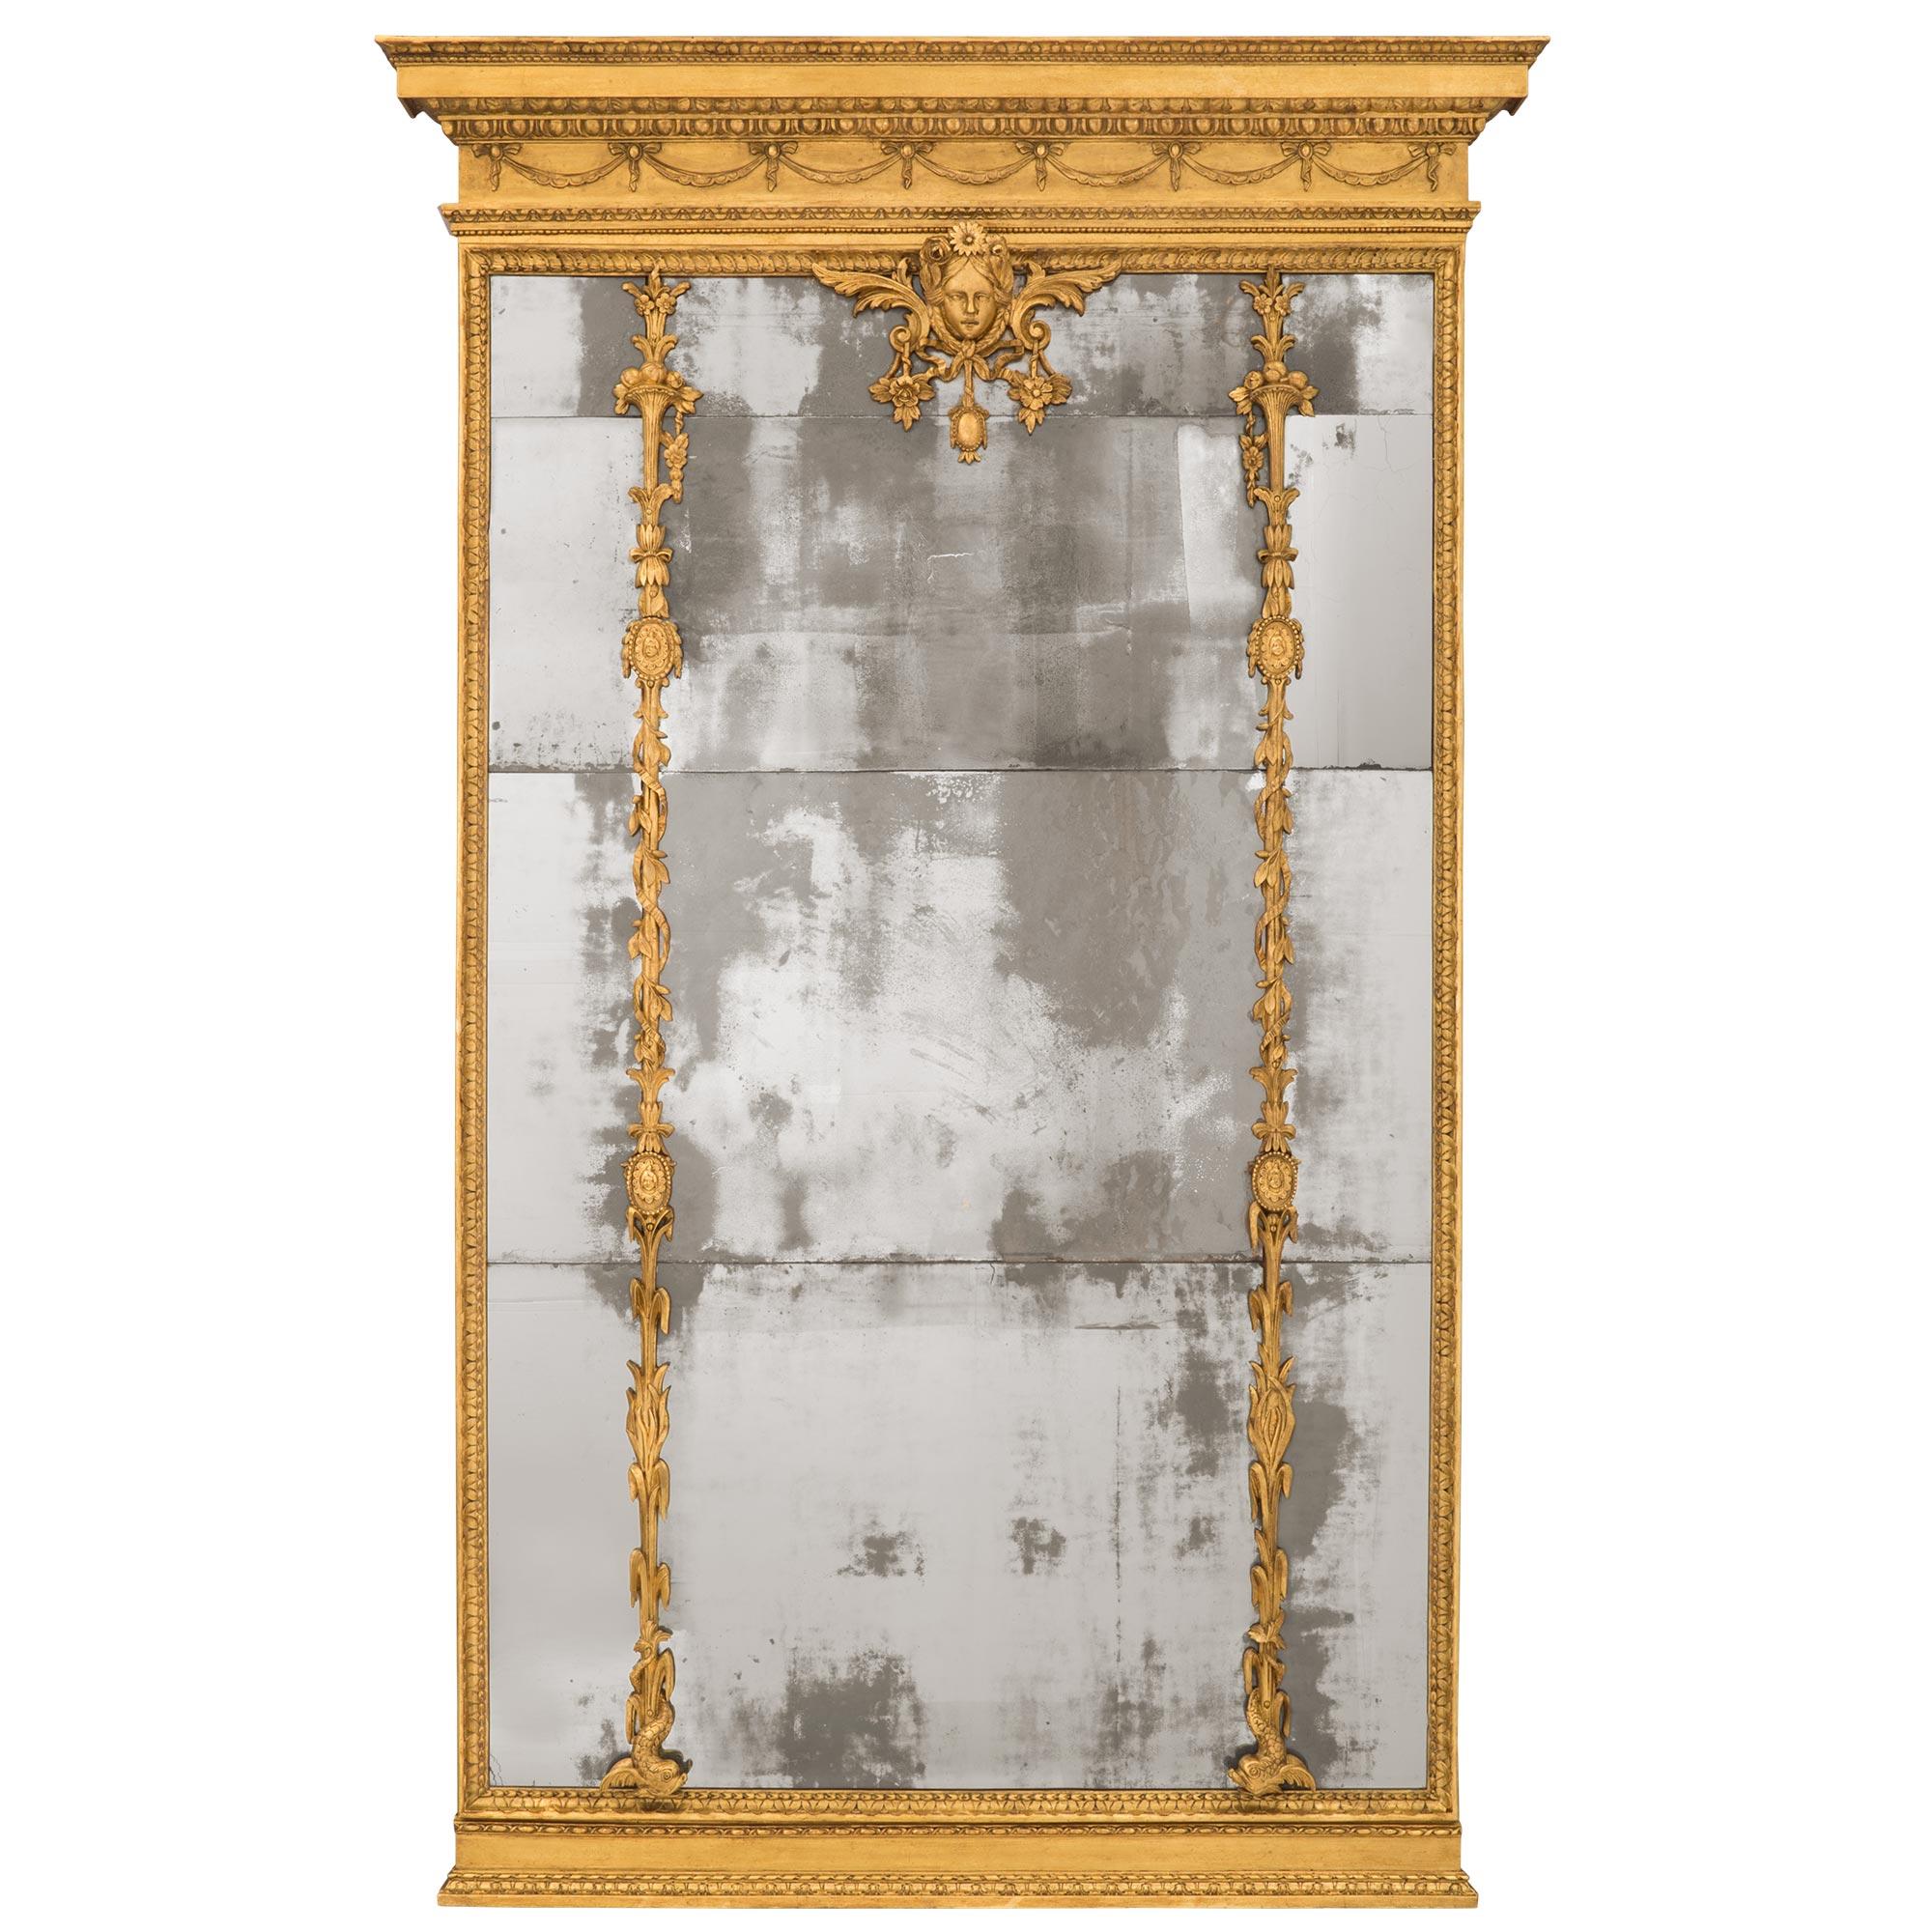 A stunning and monumentally scaled Italian 18th century Louis XVI period giltwood mirror. The mirror retains all of its original mirror plates set within a beautiful mottled foliate border. The base also displays a fine mottled design with elegant